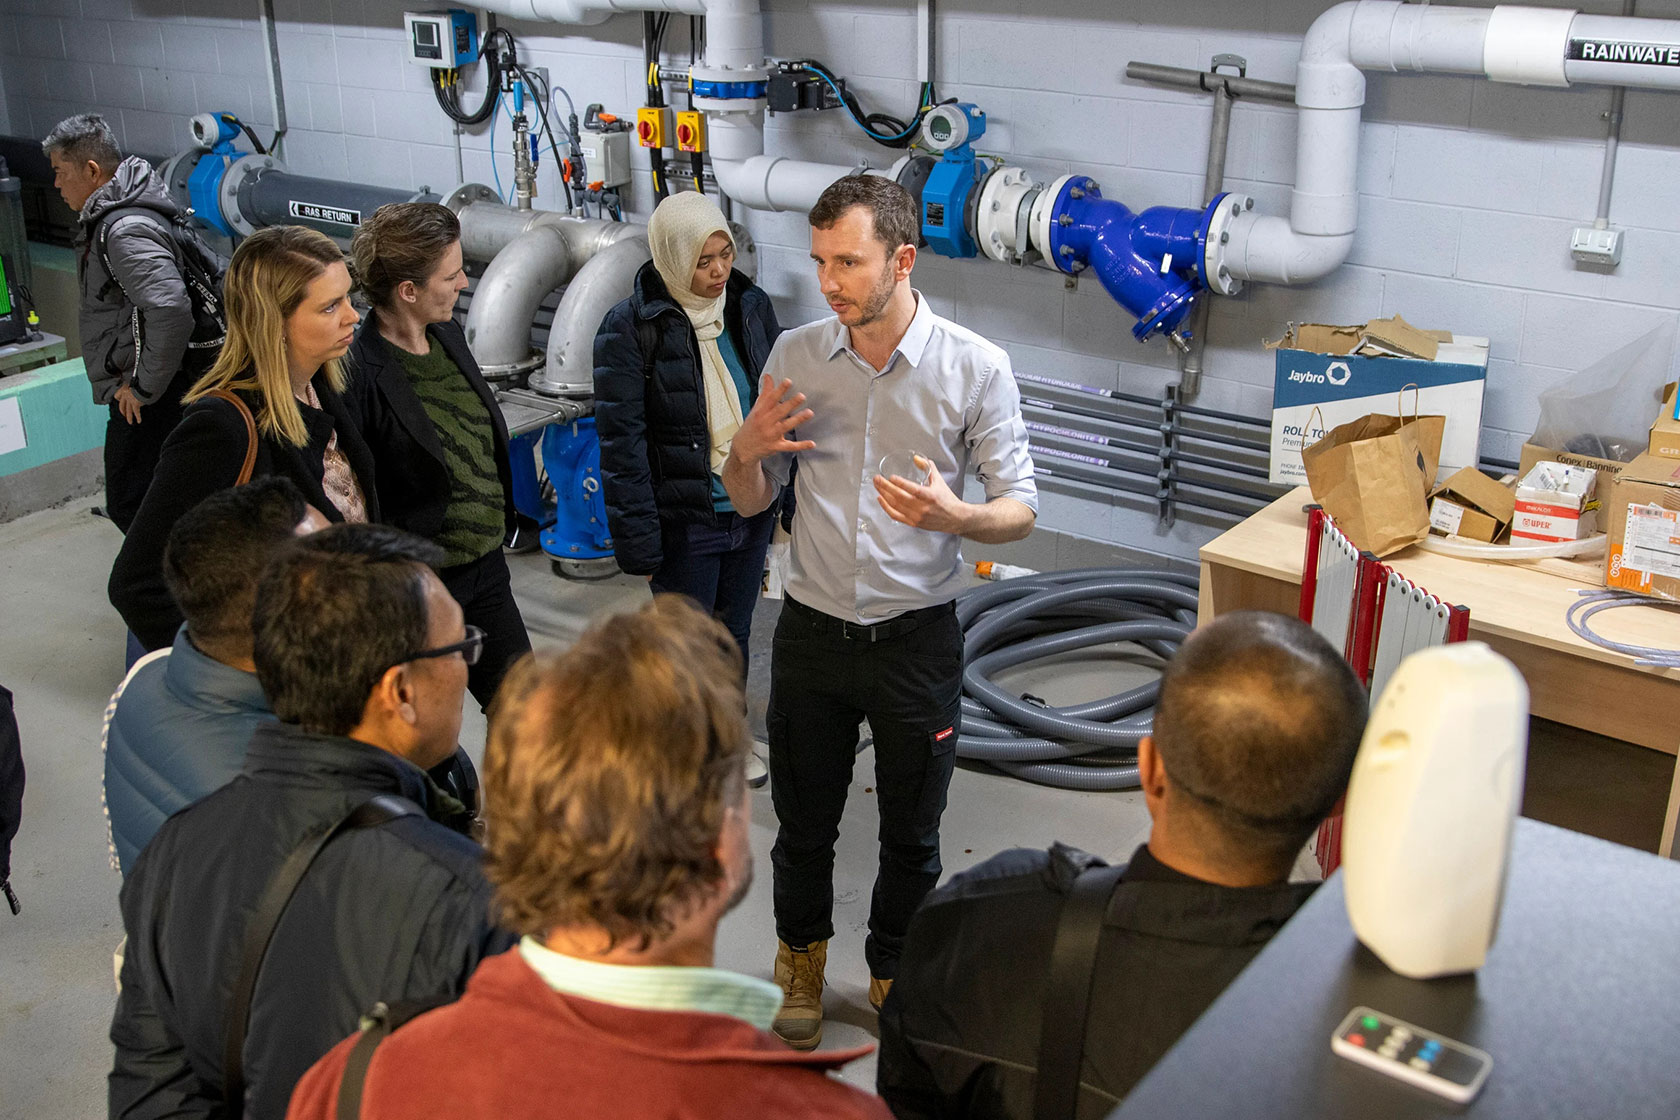 The participants visit Altogether Group’s office in Sydney, a prominent player in providing sustainable water solutions for urban communities.